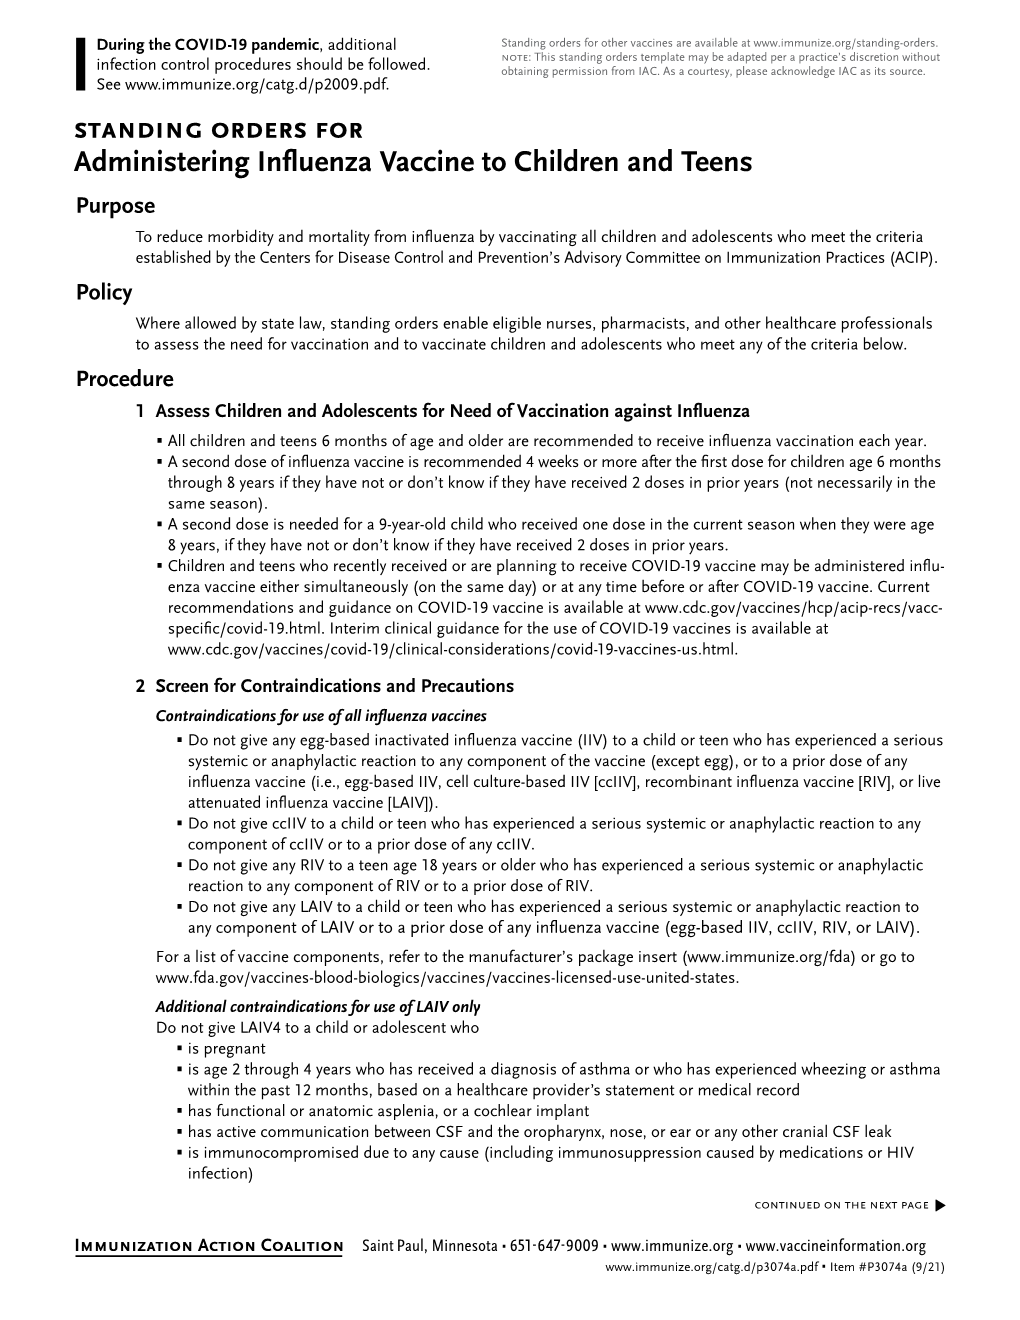 Standing Orders for Administering Influenza Vaccine to Children And